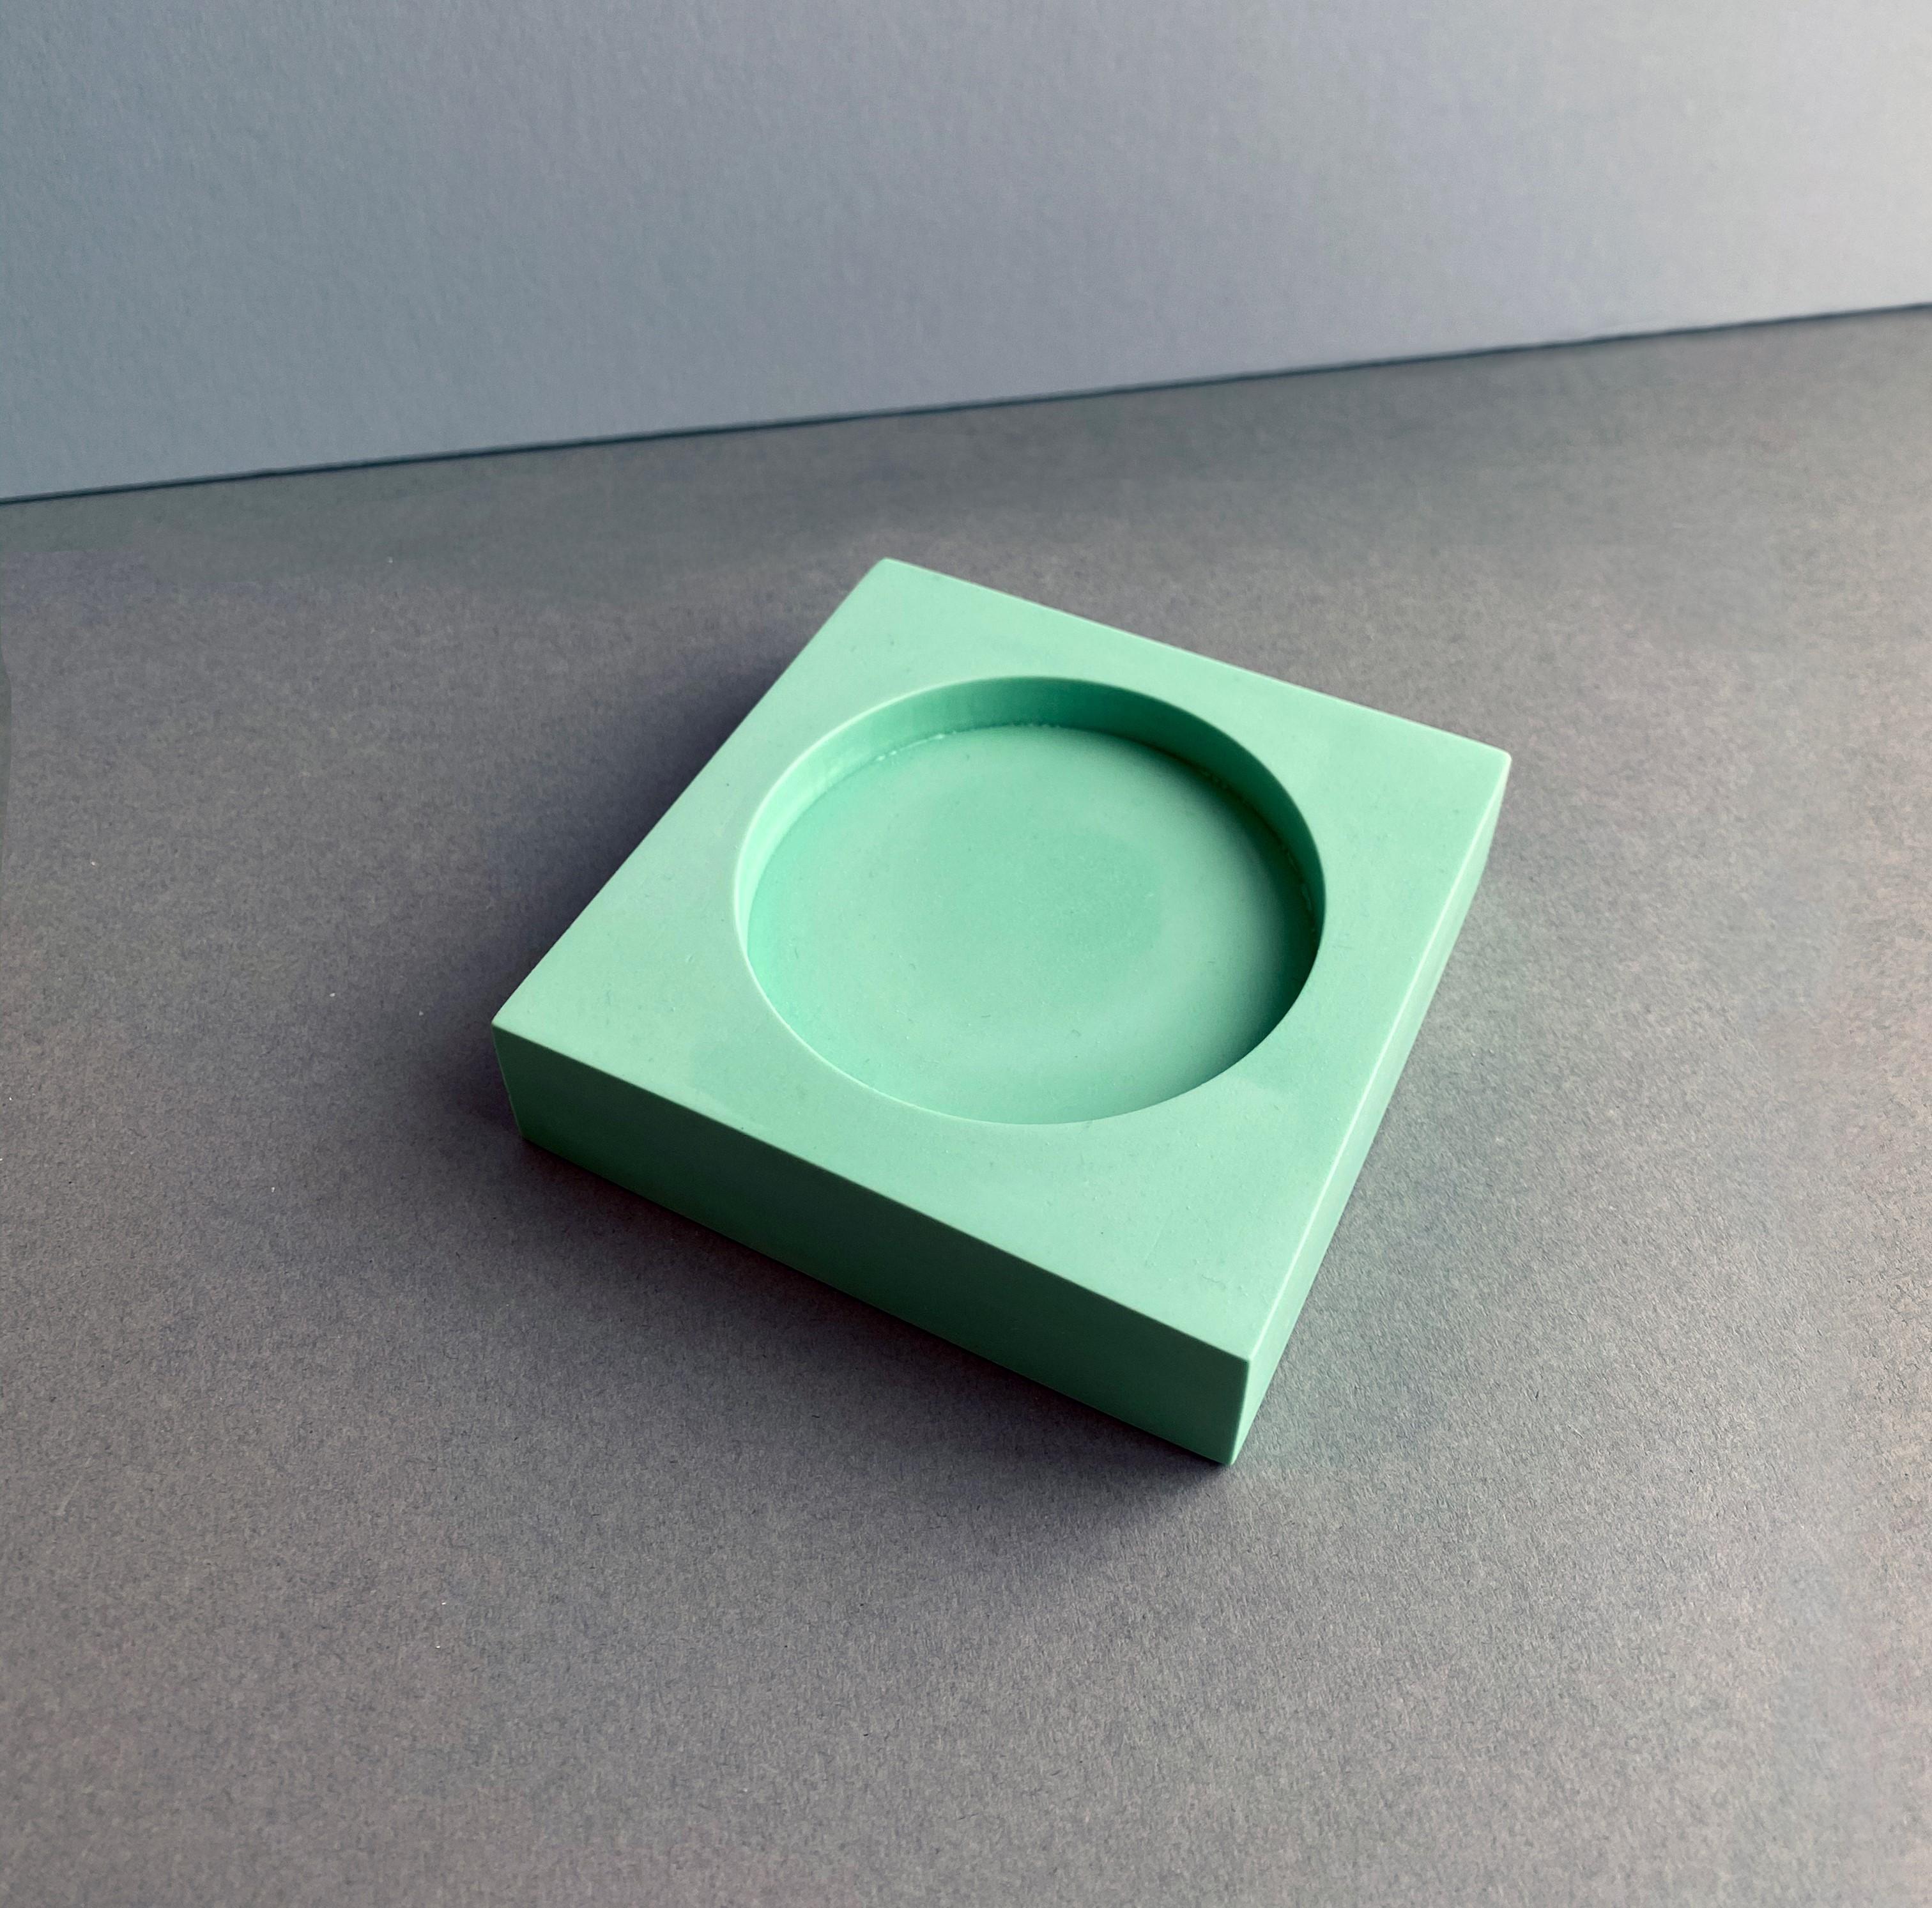 Green bowl mould project by Theodora Alfredsdottir
Unique
Materials: Jesmonite
Dimensions: 110 x 110 x 25 mm

Theodora Alfredsdottir is a product design studio based in London. 
Theodora is an Icelandic product designer. She holds a bachelor’s